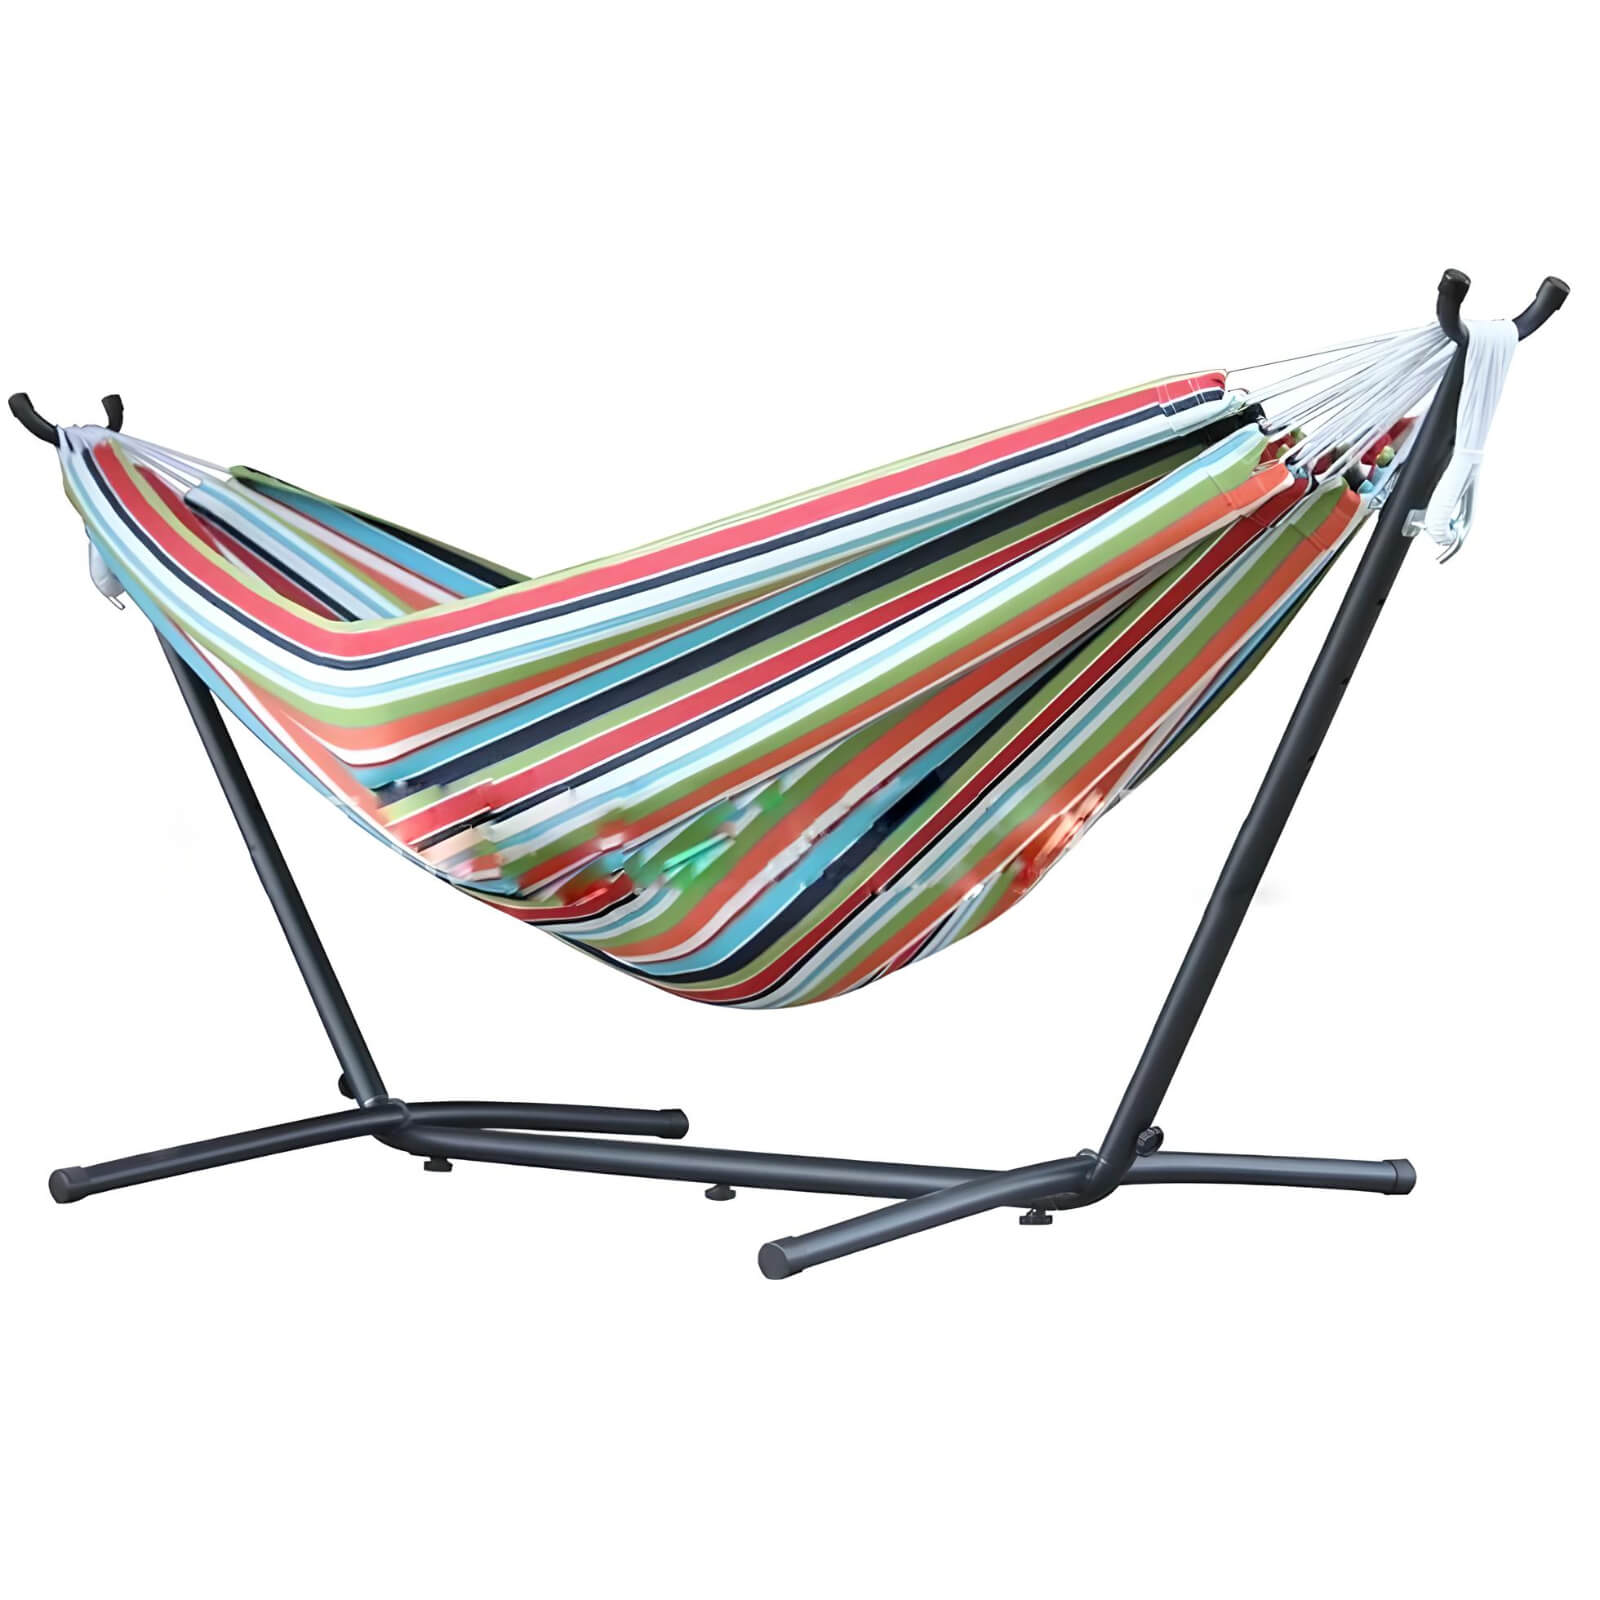    view-in-steel-stand-for-hammock